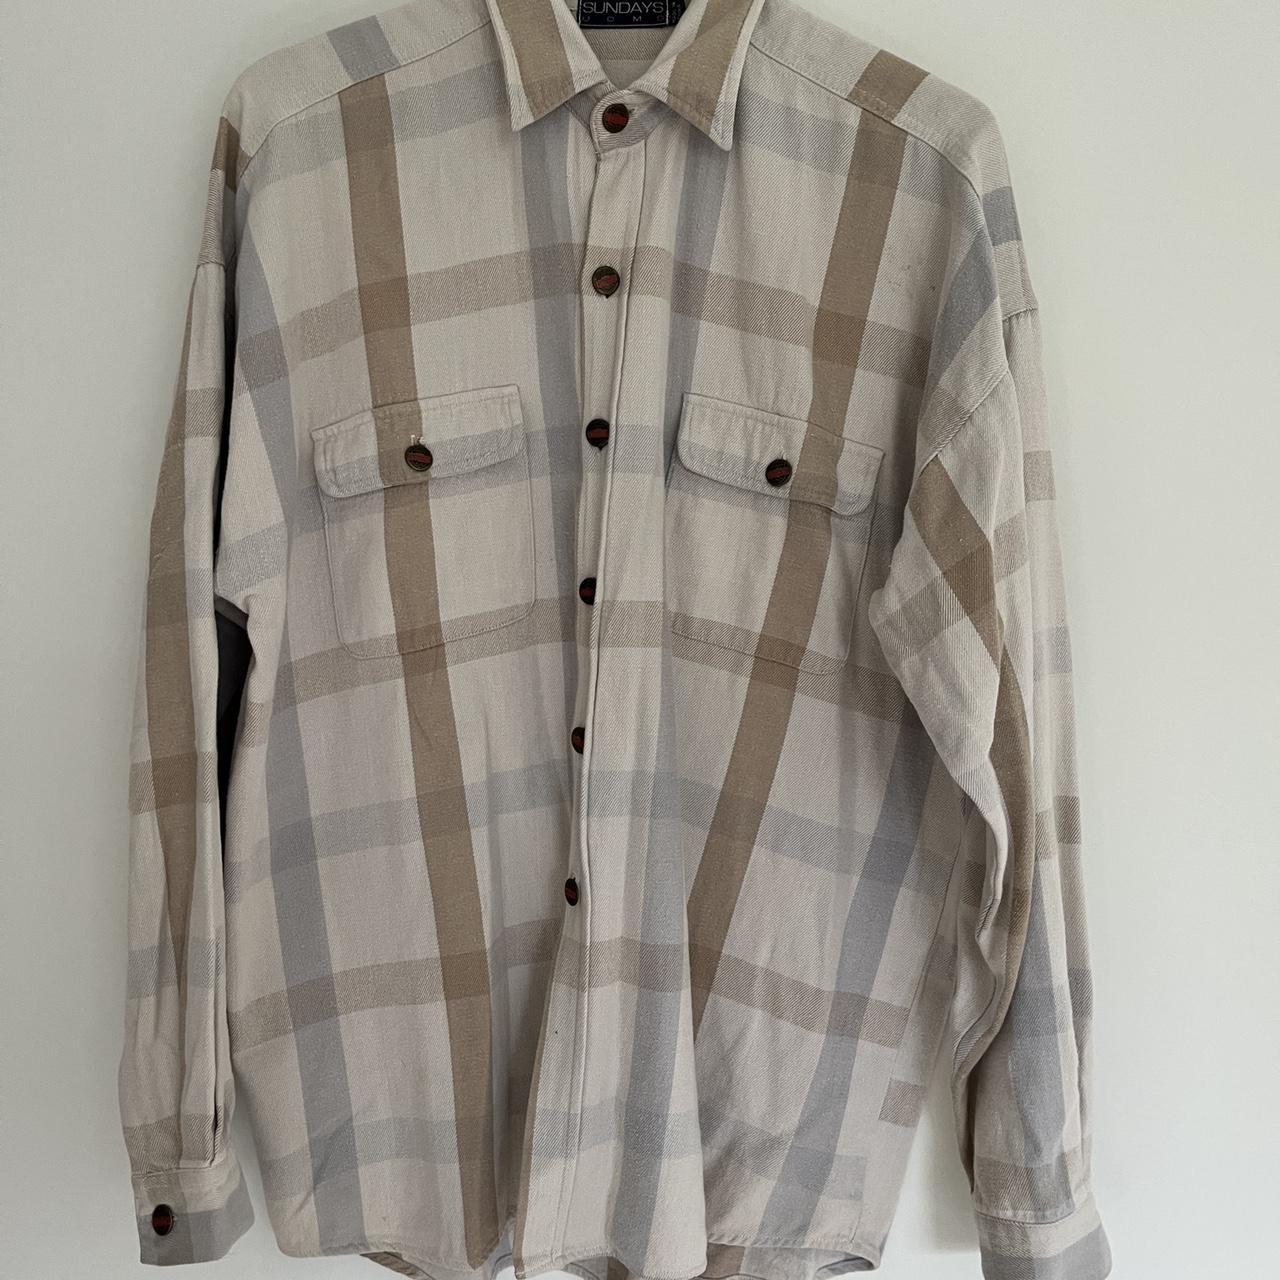 Vintage heavy weight button dow check shirt in... - Depop